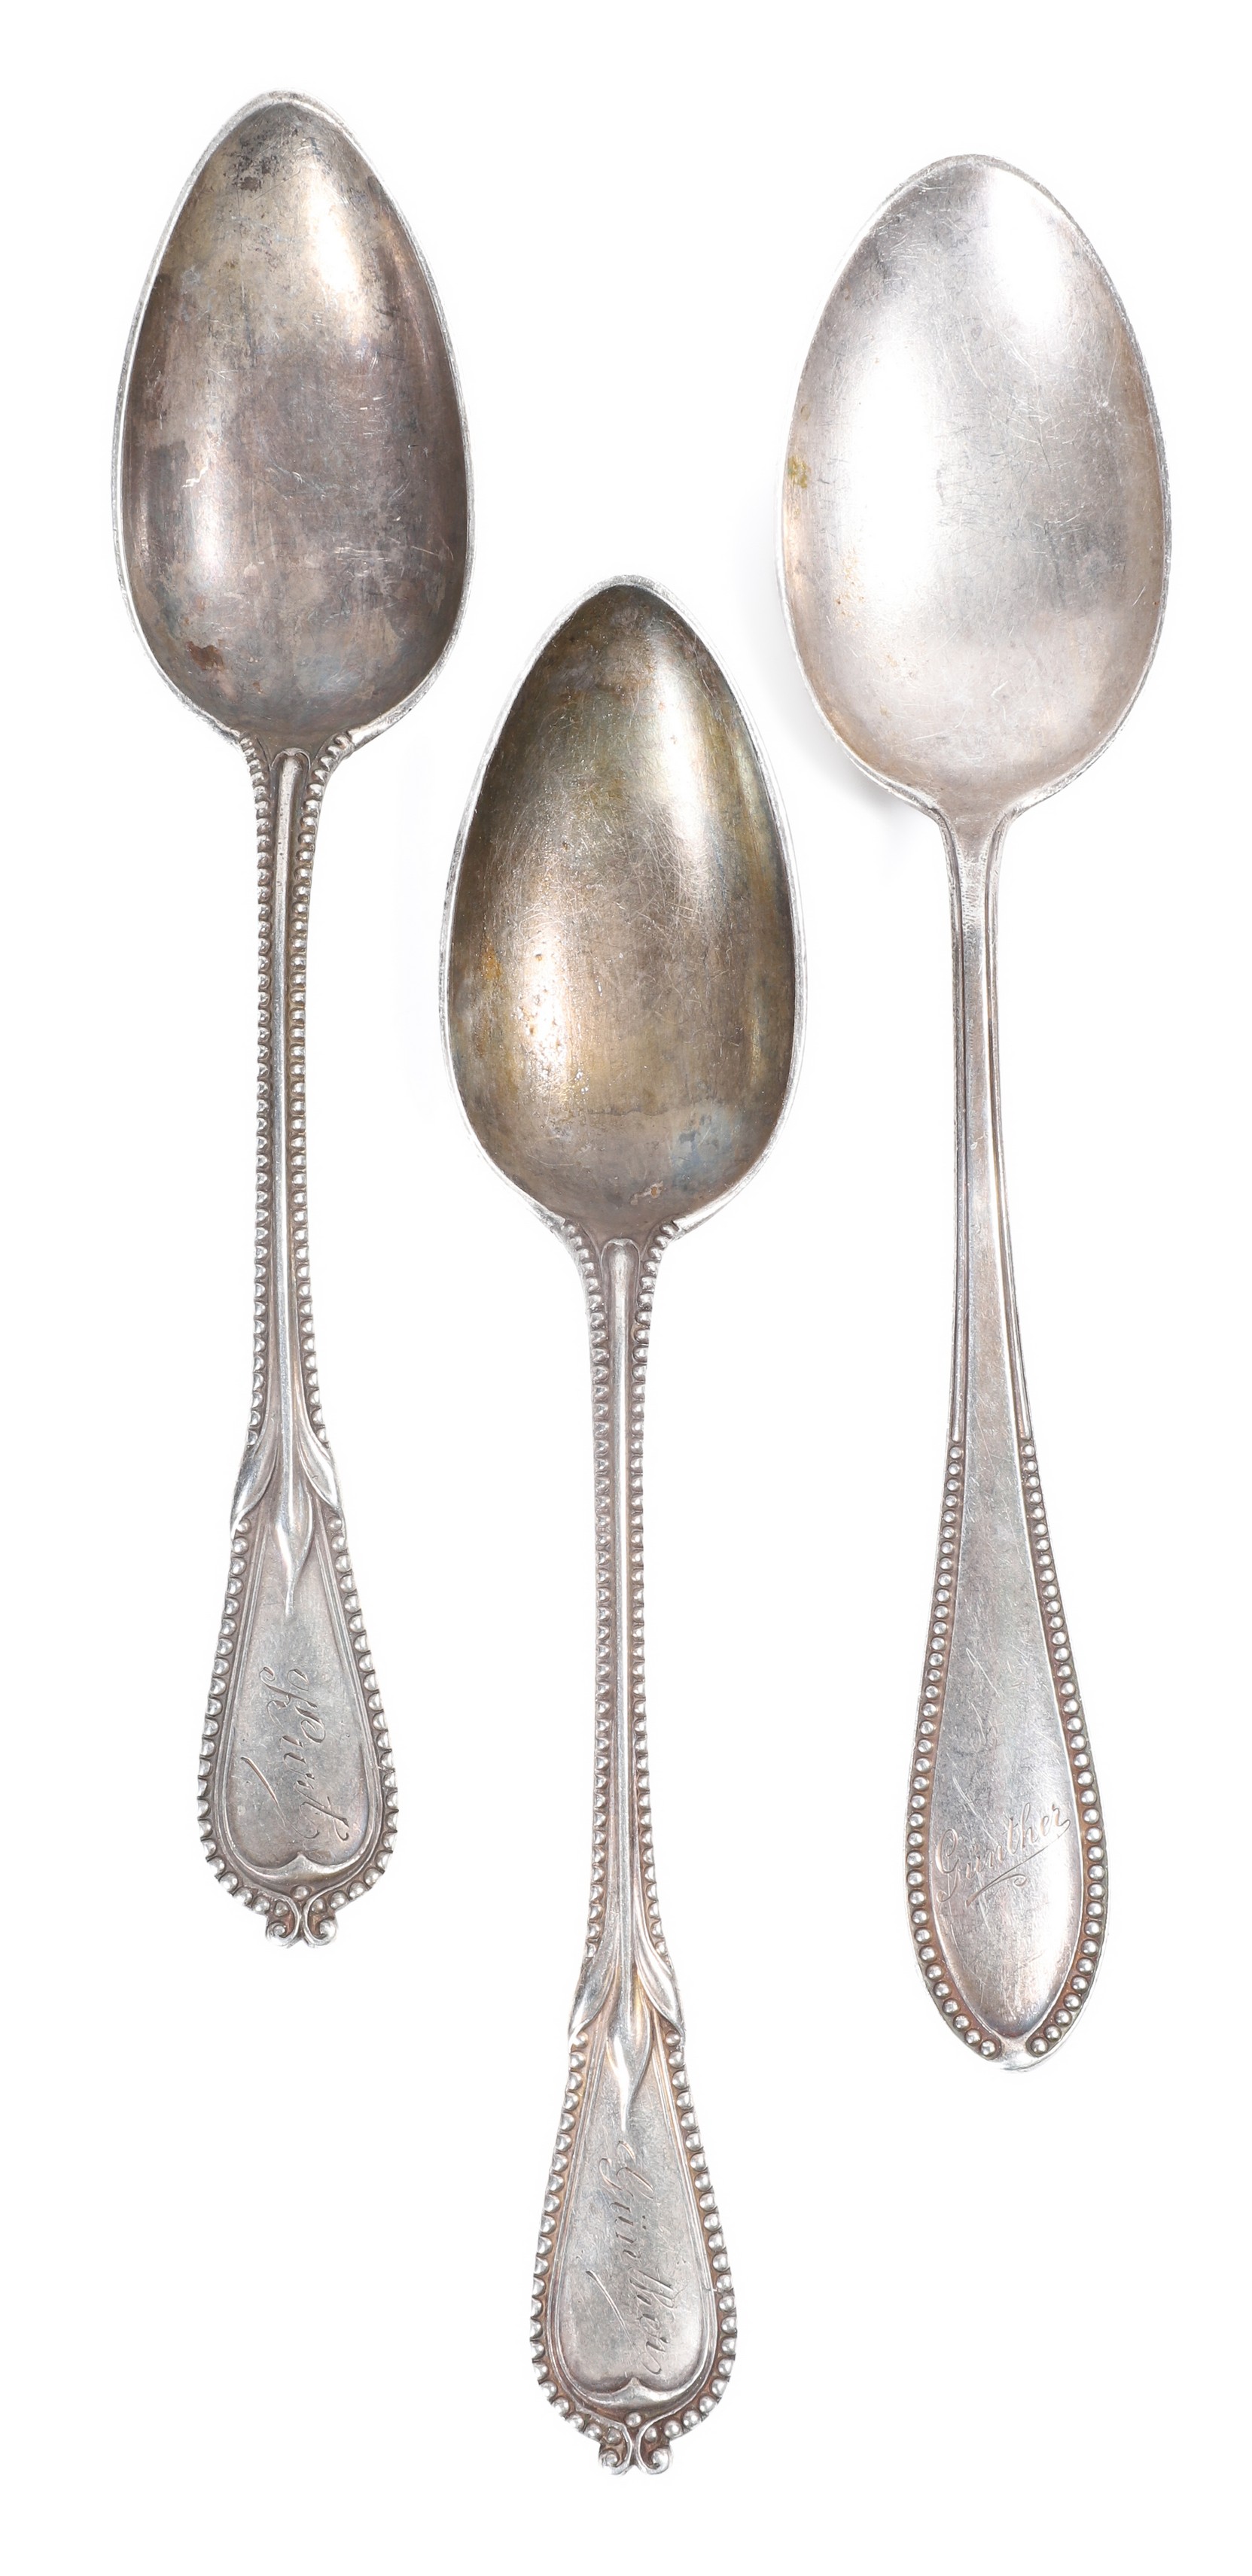  3 Silver table spoons to include 2e077f